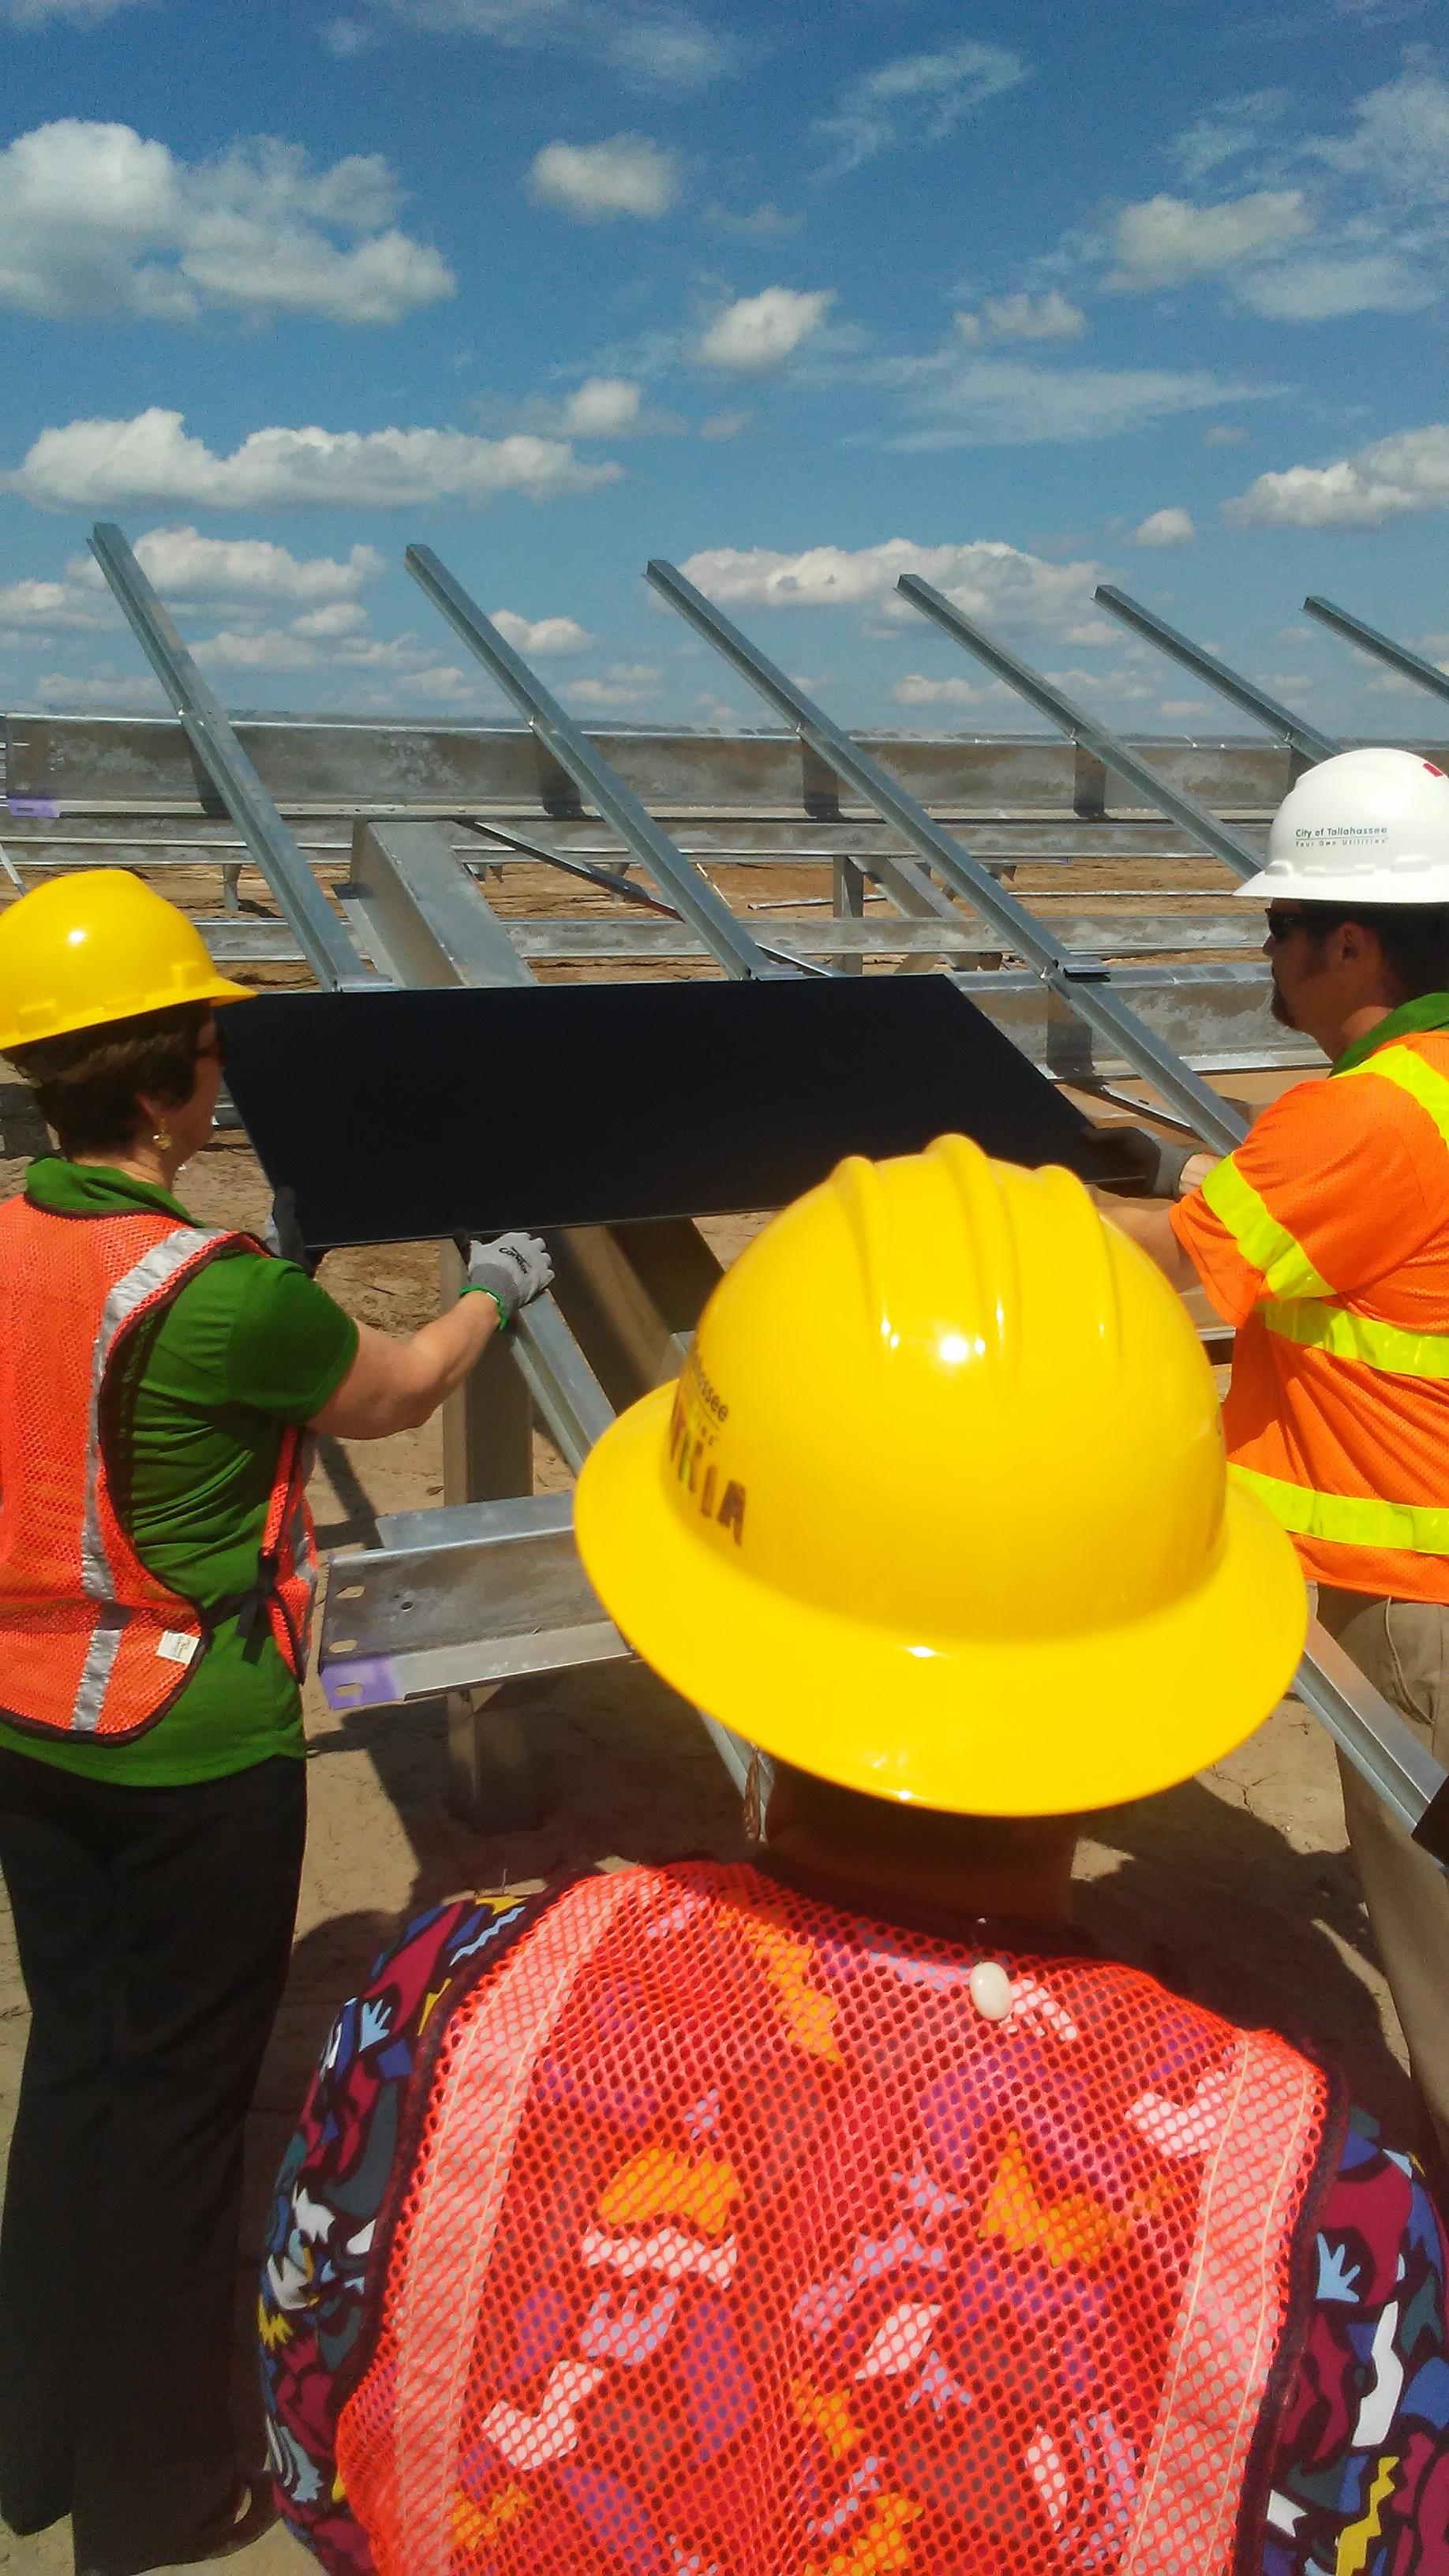 tallahassee-begins-installing-first-of-200-000-solar-panels-wfsu